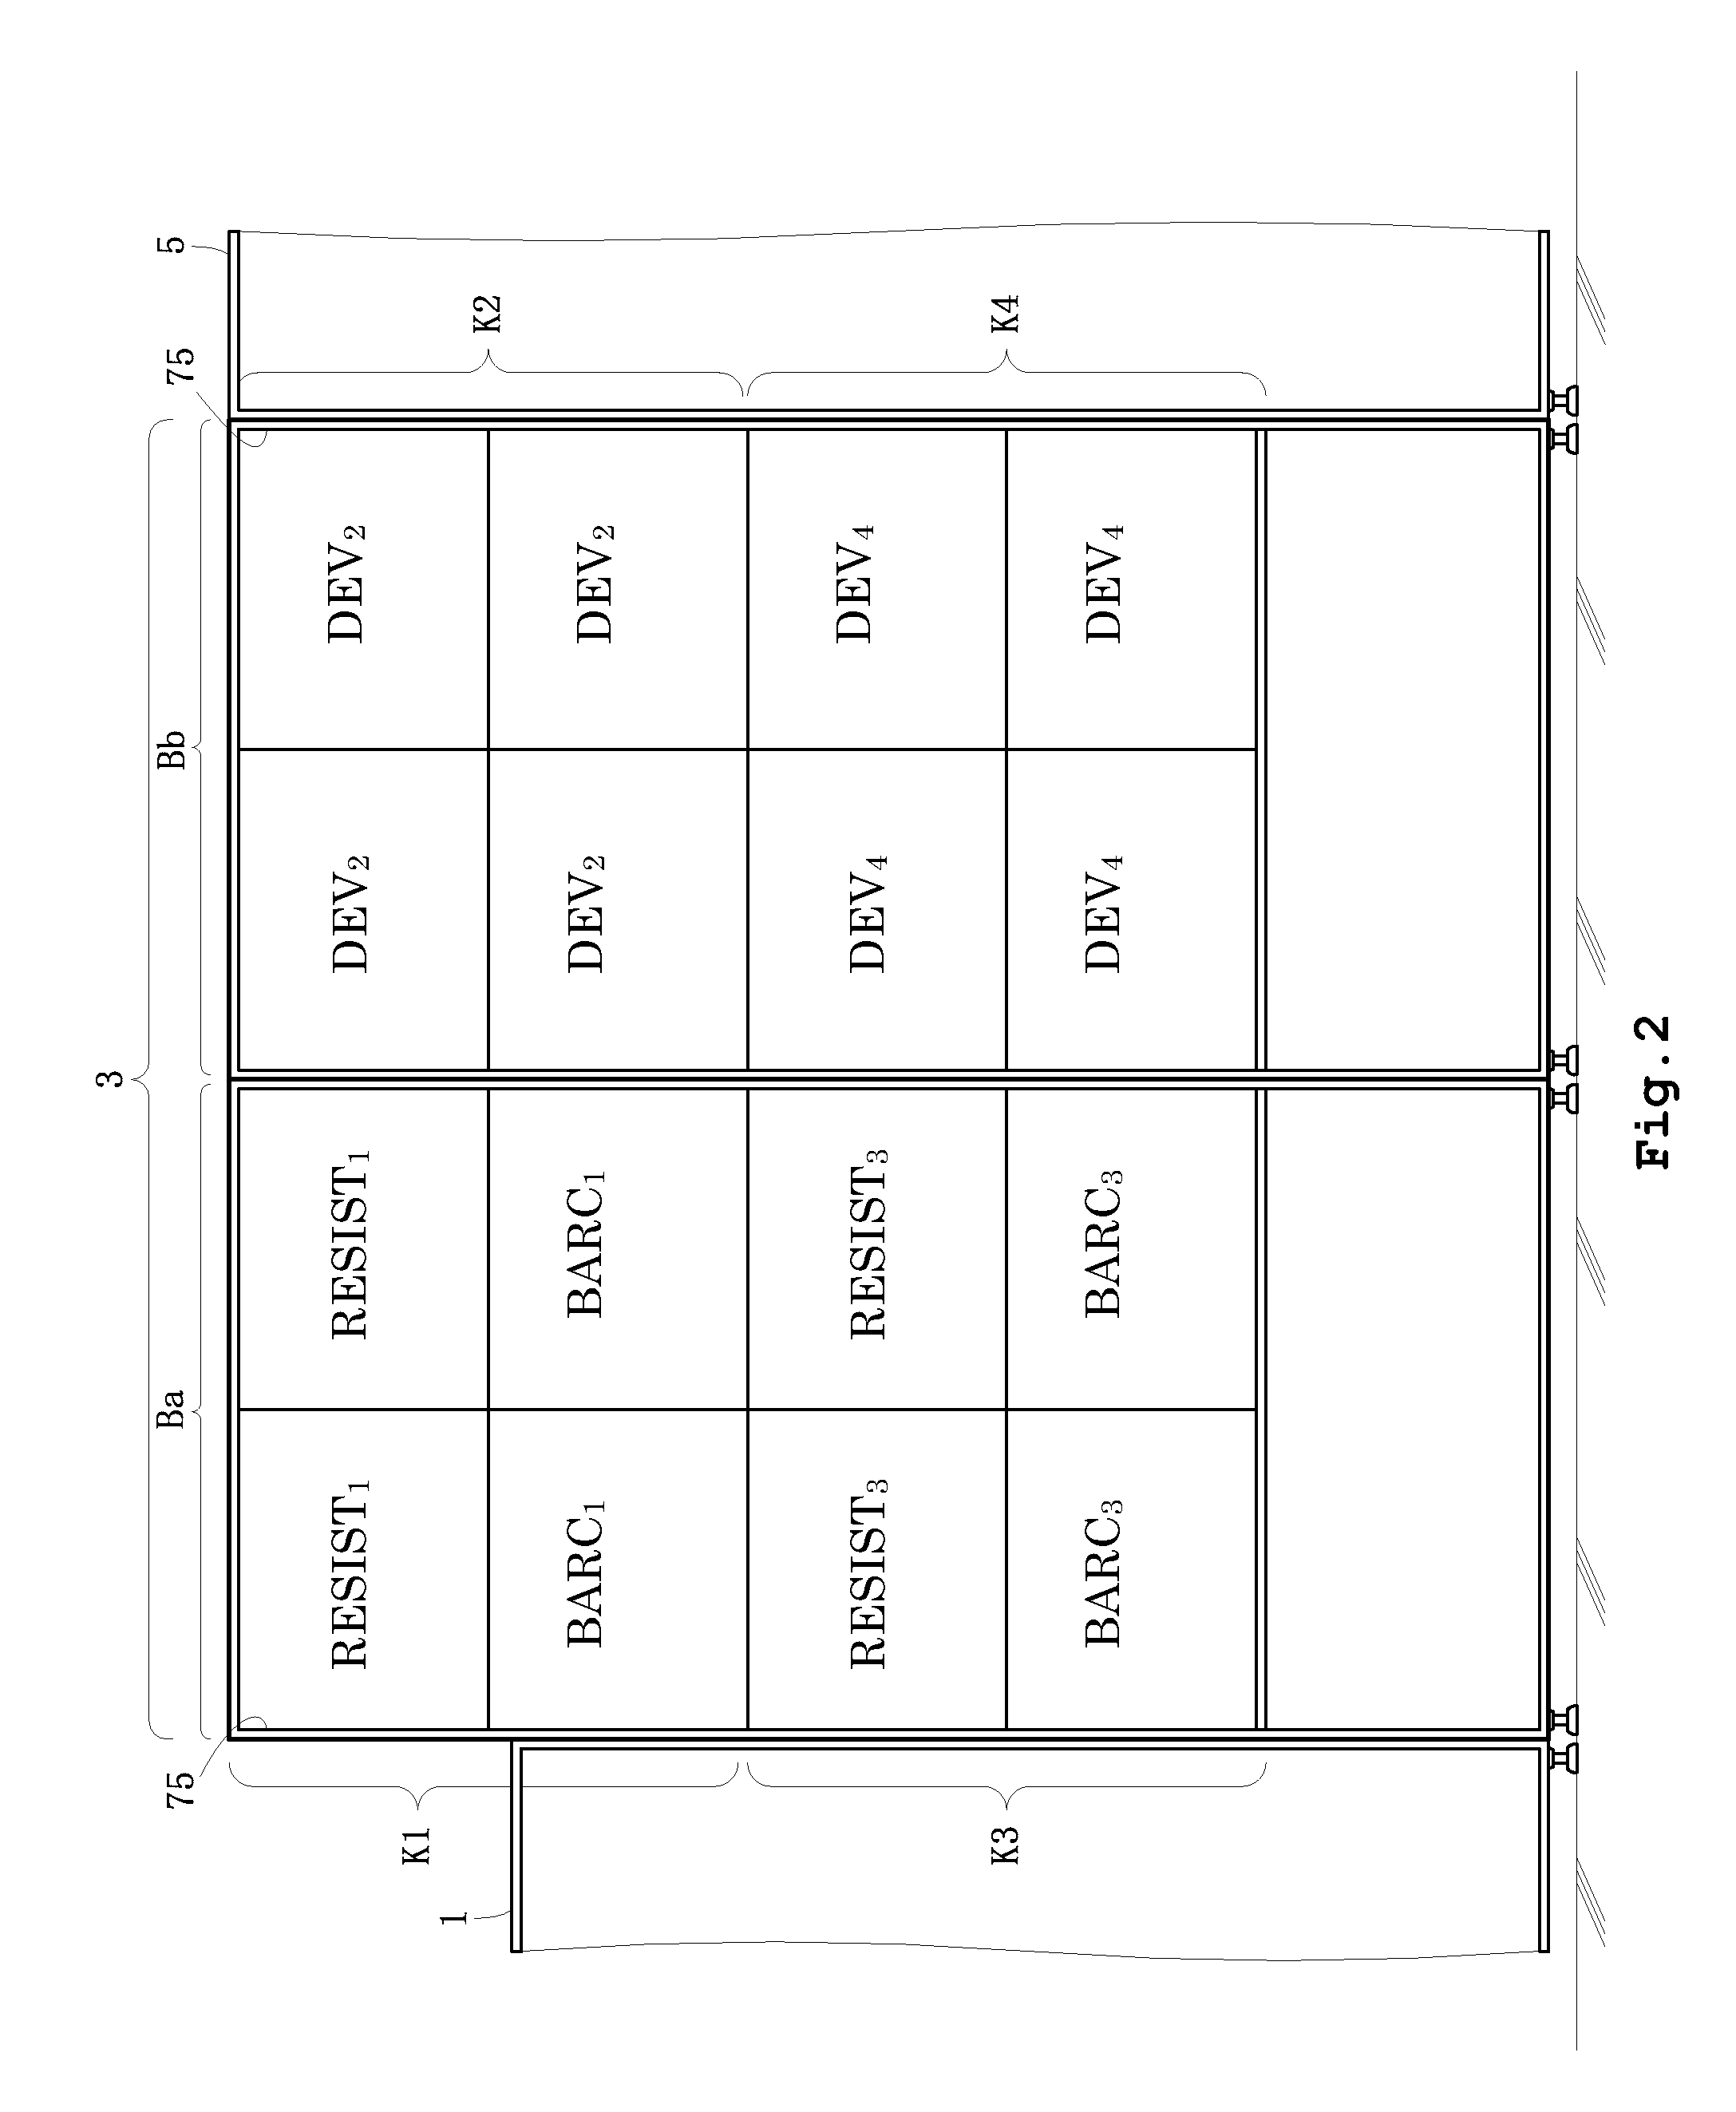 Substrate treating apparatus with inter-unit buffers